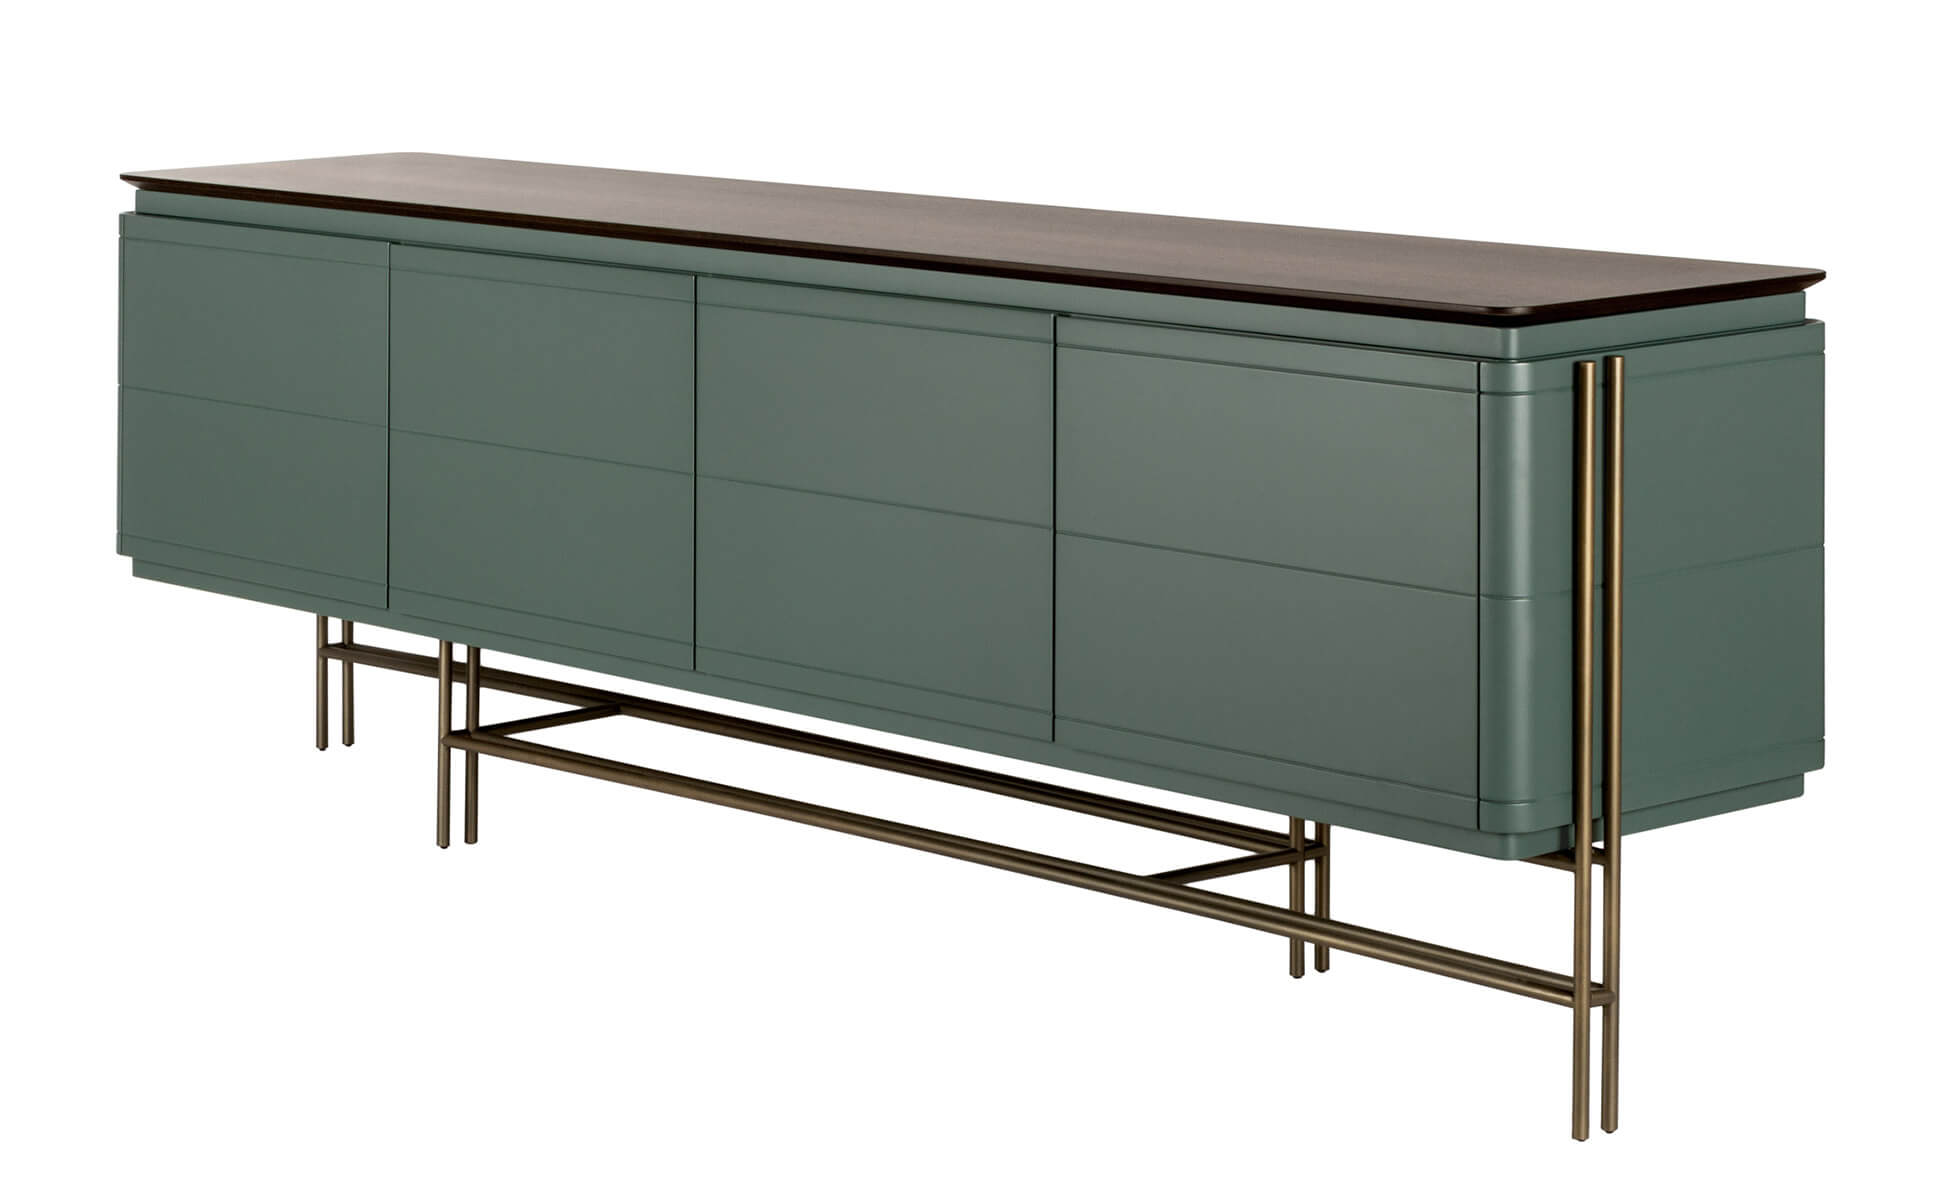 Nihil 003 sideboard in lacquer and smoked eucalyptus top. al2, art for living